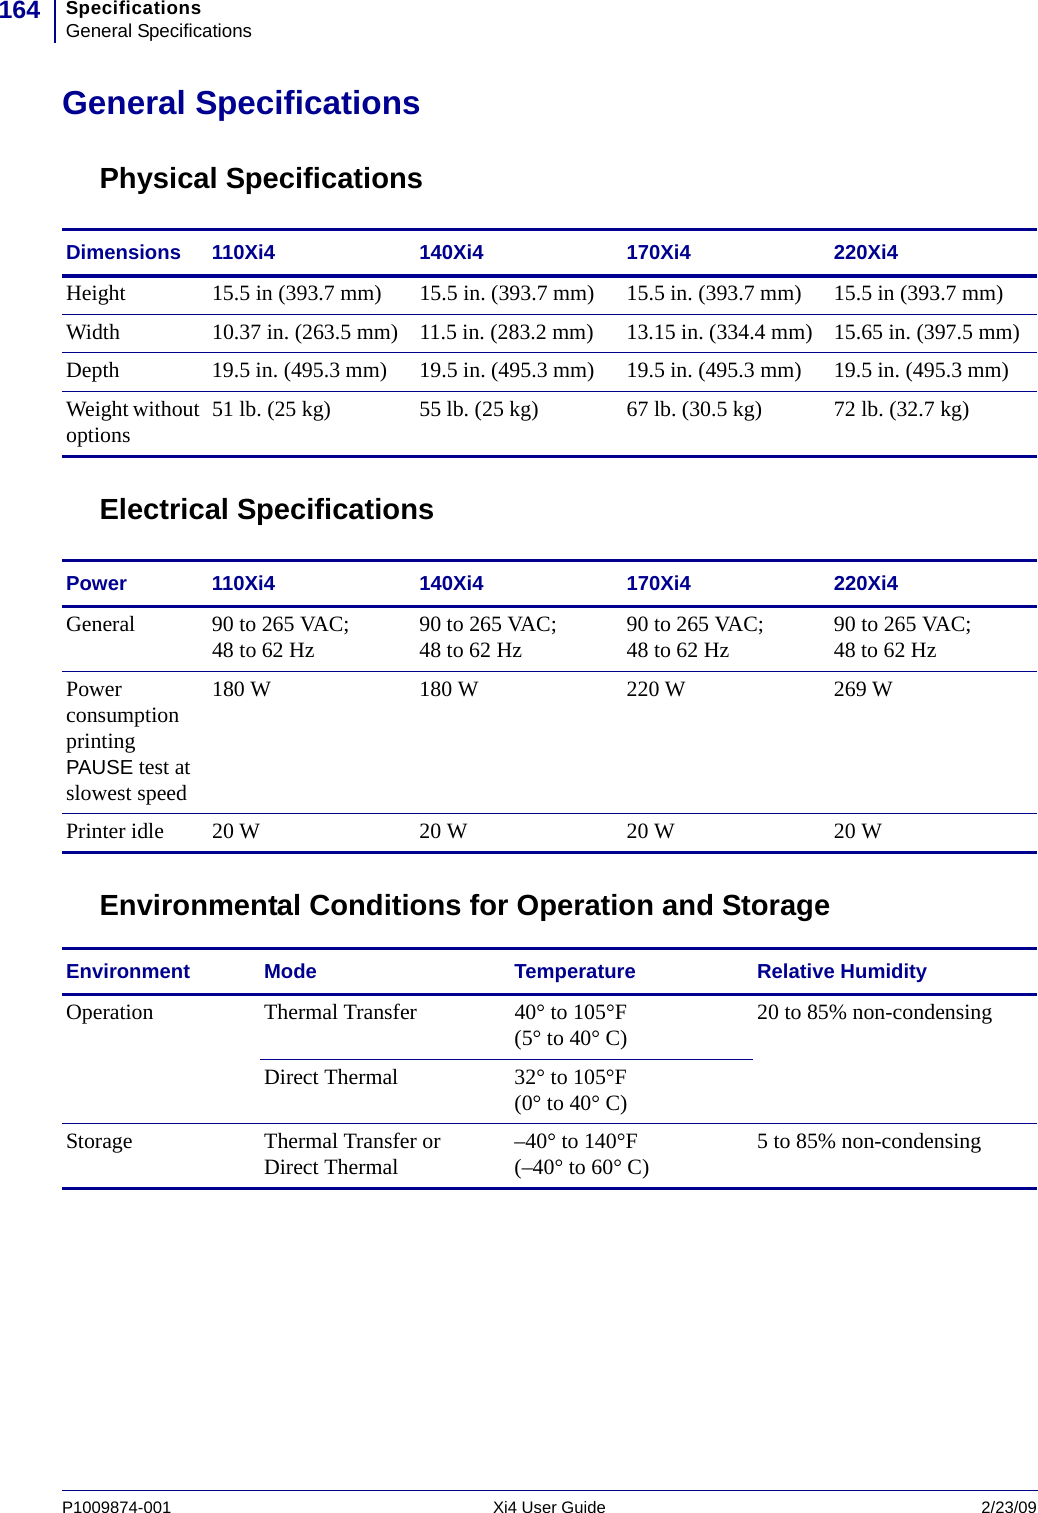 SpecificationsGeneral Specifications164P1009874-001   Xi4 User Guide 2/23/09General SpecificationsPhysical SpecificationsElectrical SpecificationsEnvironmental Conditions for Operation and StorageDimensions 110Xi4 140Xi4 170Xi4 220Xi4Height 15.5 in (393.7 mm) 15.5 in. (393.7 mm) 15.5 in. (393.7 mm) 15.5 in (393.7 mm)Width 10.37 in. (263.5 mm) 11.5 in. (283.2 mm) 13.15 in. (334.4 mm) 15.65 in. (397.5 mm)Depth 19.5 in. (495.3 mm) 19.5 in. (495.3 mm) 19.5 in. (495.3 mm) 19.5 in. (495.3 mm)Weight without options 51 lb. (25 kg) 55 lb. (25 kg) 67 lb. (30.5 kg) 72 lb. (32.7 kg)Power 110Xi4 140Xi4 170Xi4 220Xi4General 90 to 265 VAC; 48 to 62 Hz 90 to 265 VAC; 48 to 62 Hz 90 to 265 VAC; 48 to 62 Hz 90 to 265 VAC; 48 to 62 HzPower consumption printing PAUSE test at slowest speed180 W 180 W 220 W 269 WPrinter idle 20 W 20 W 20 W 20 WEnvironment Mode Temperature Relative HumidityOperation  Thermal Transfer 40° to 105°F(5° to 40° C) 20 to 85% non-condensingDirect Thermal 32° to 105°F(0° to 40° C)Storage Thermal Transfer or Direct Thermal –40° to 140°F(–40° to 60° C) 5 to 85% non-condensing